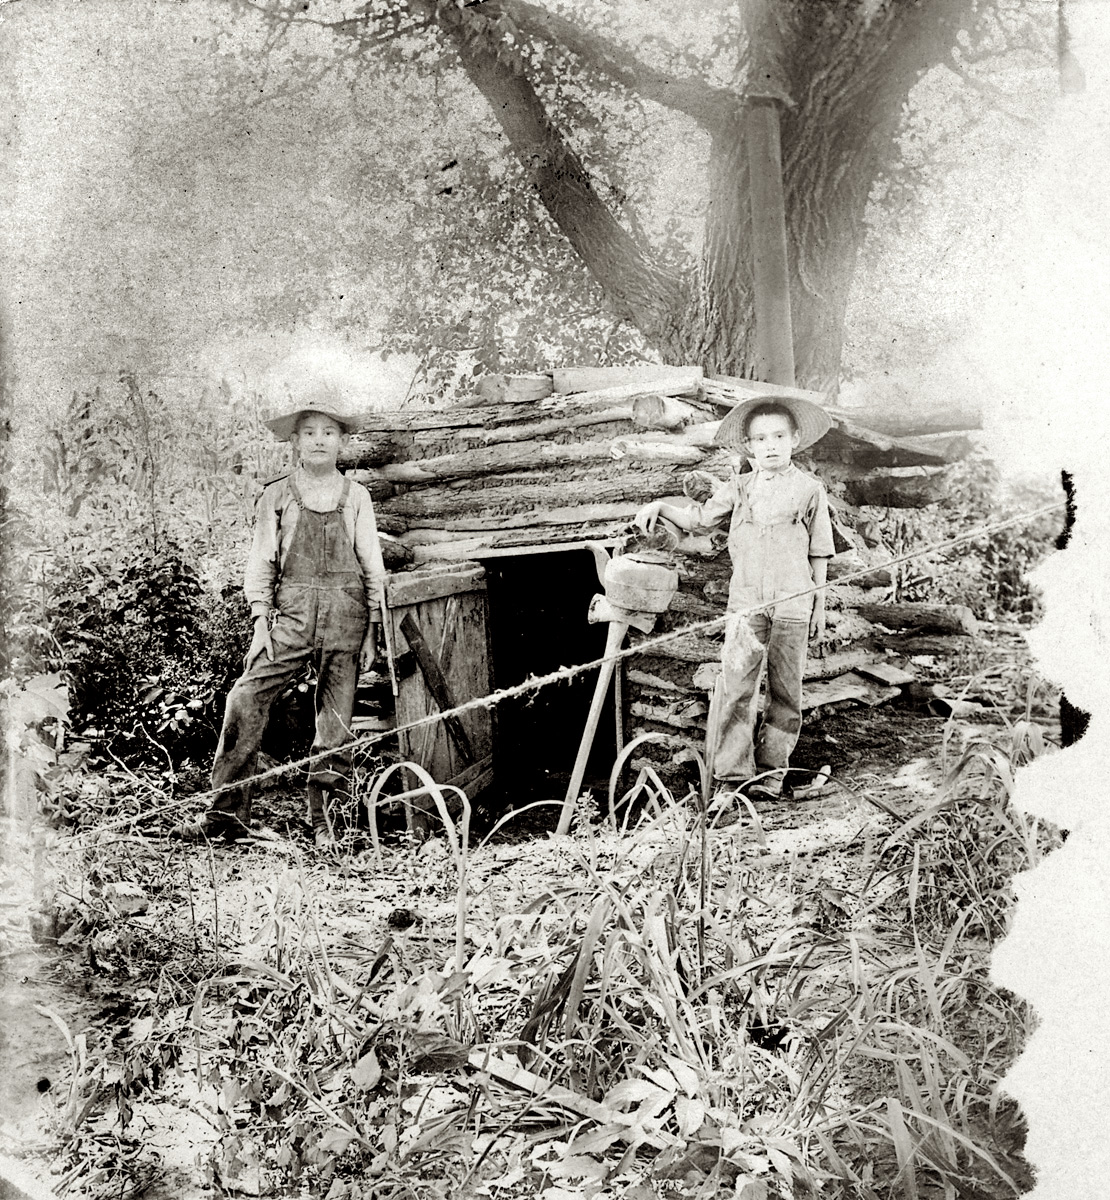 My grandfather and his brother outside the cabin they built near Louisville, Kansas in 1903.